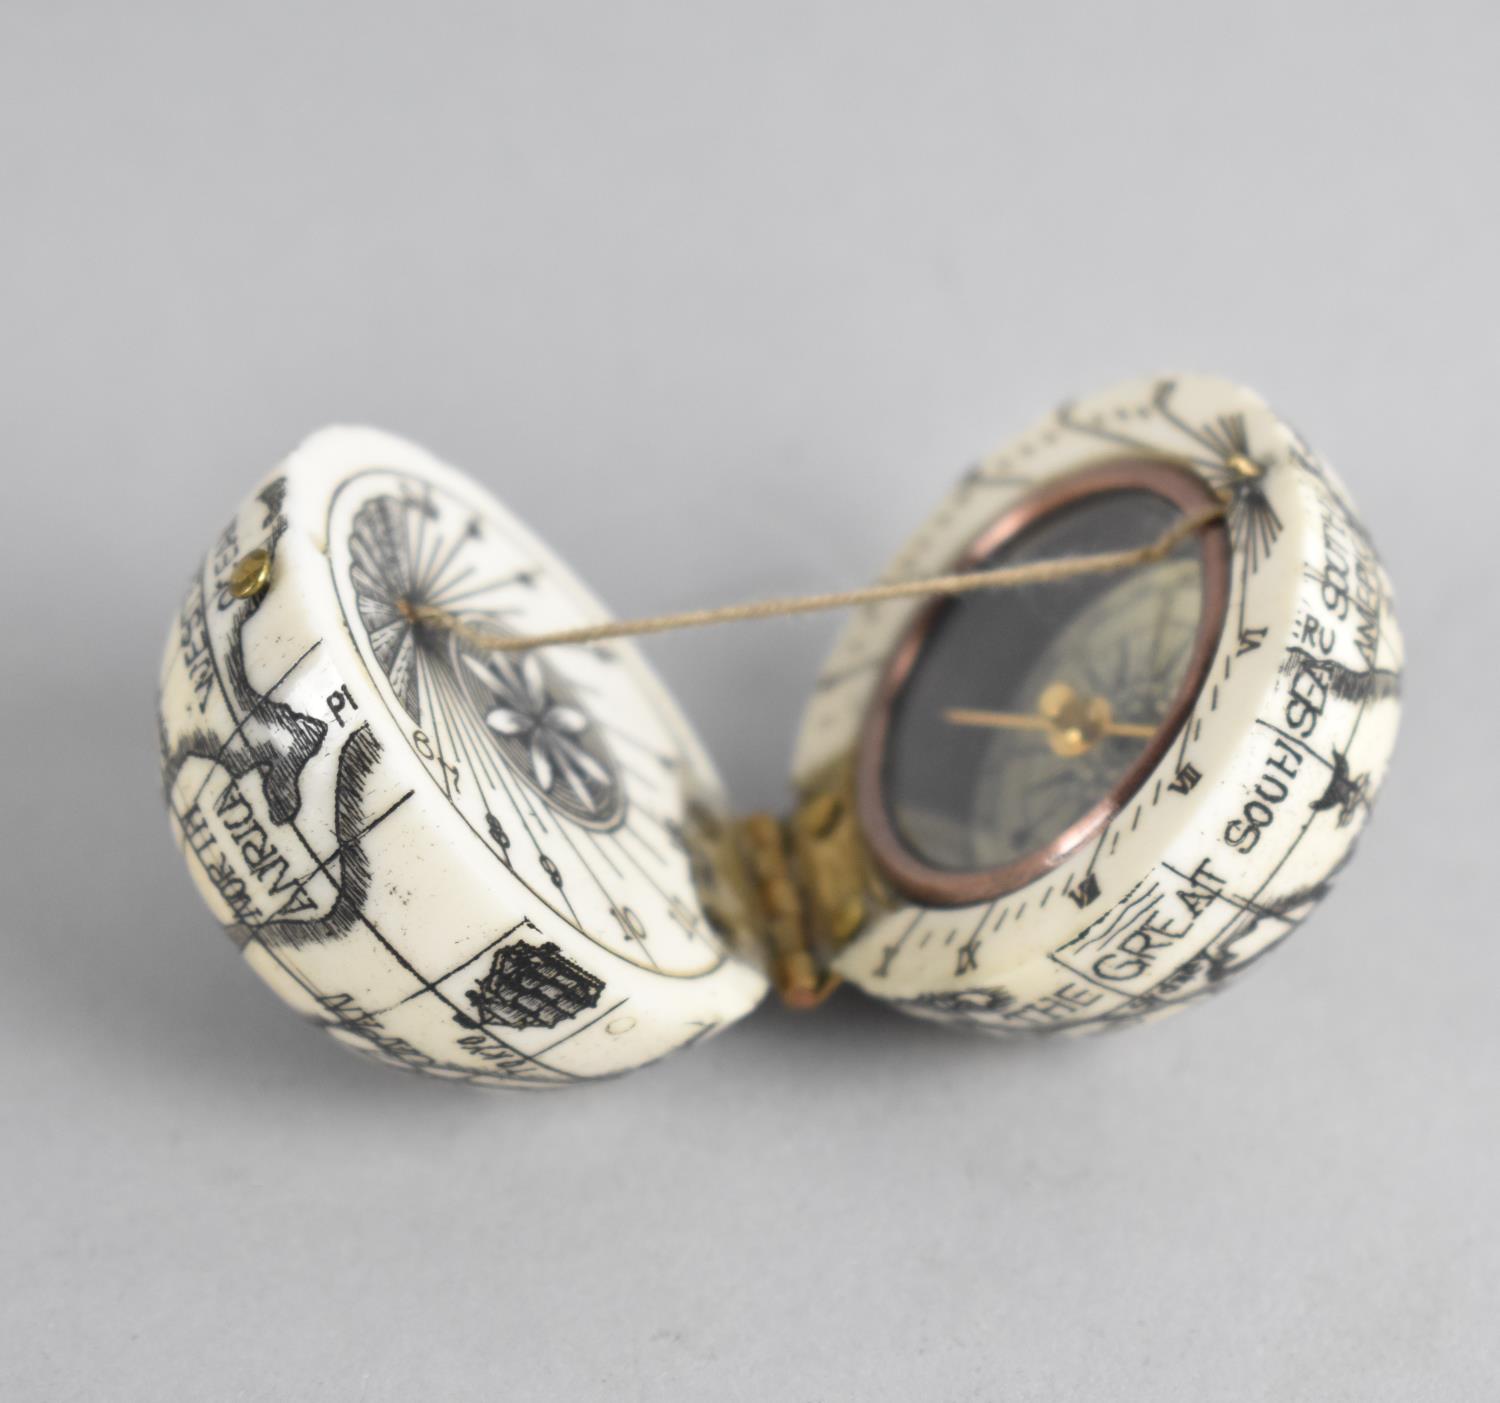 A Reproduction Scrimshaw Pocket Globe of Hinged Form with Inner Compass and Sundial, 4cms Diameter - Image 3 of 3